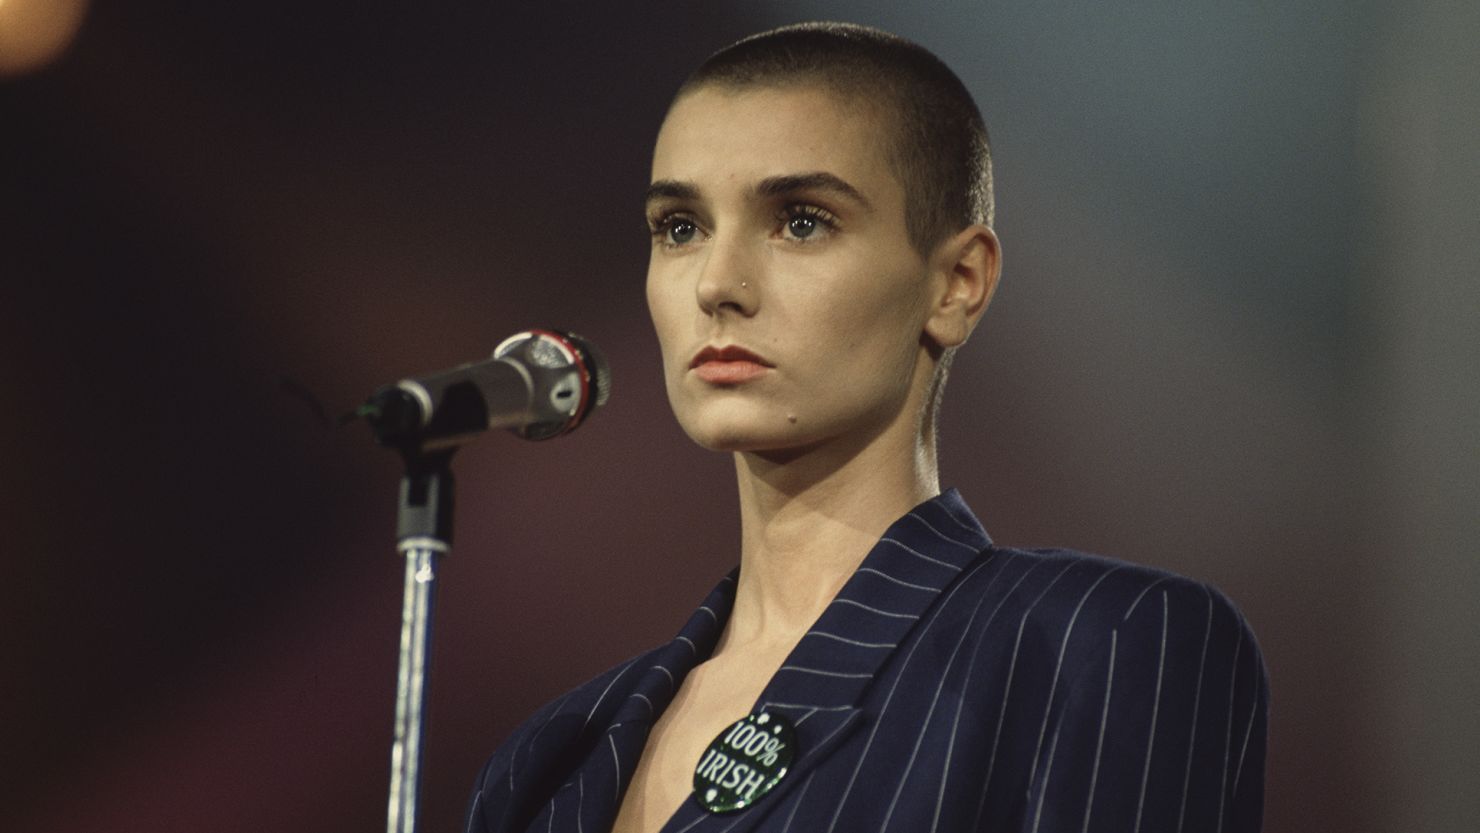 Irish singer Sinéad O'Connor died in July 2023.